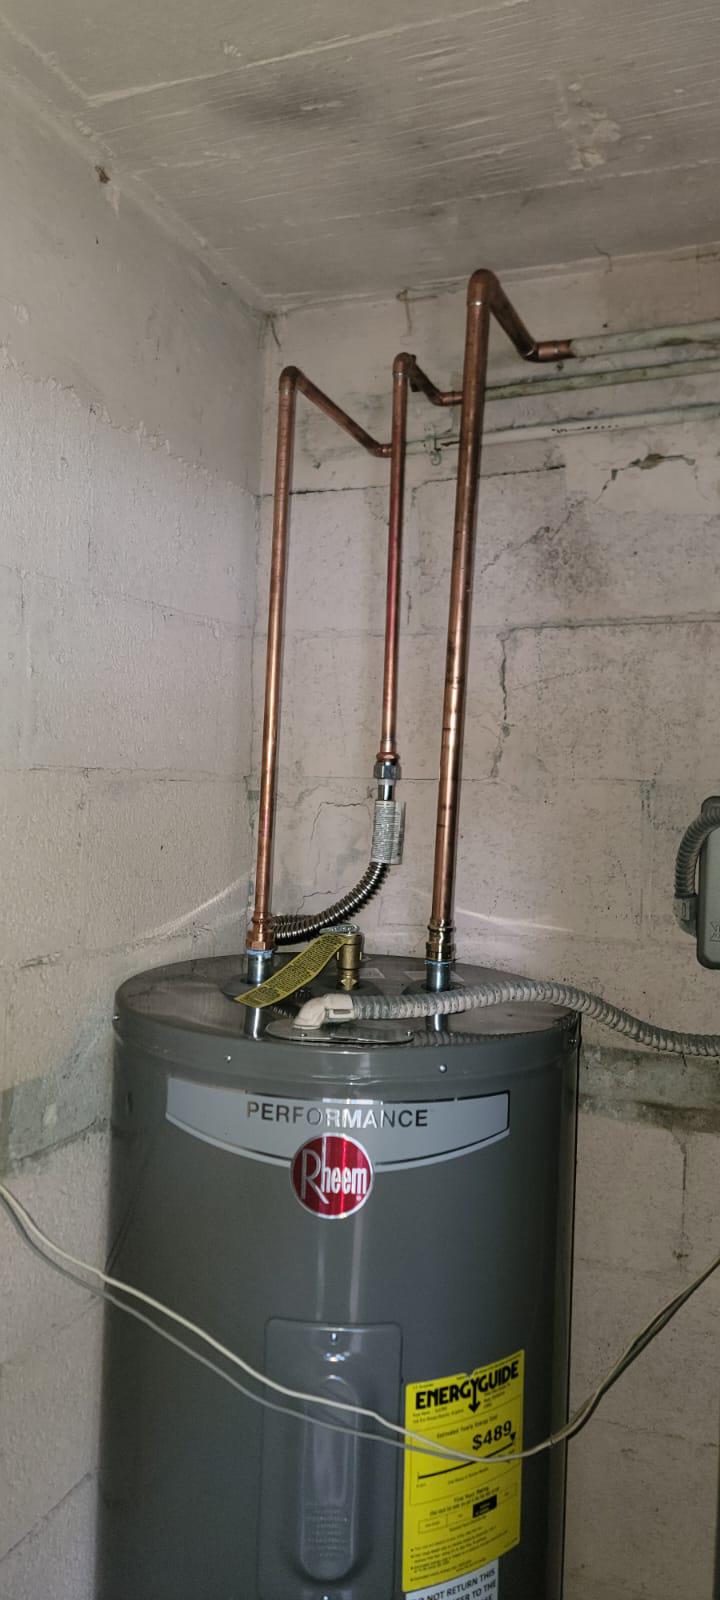 Rheem Water Heater and Valve Installation in Coral Gables - Miami 24/7 Plumbing